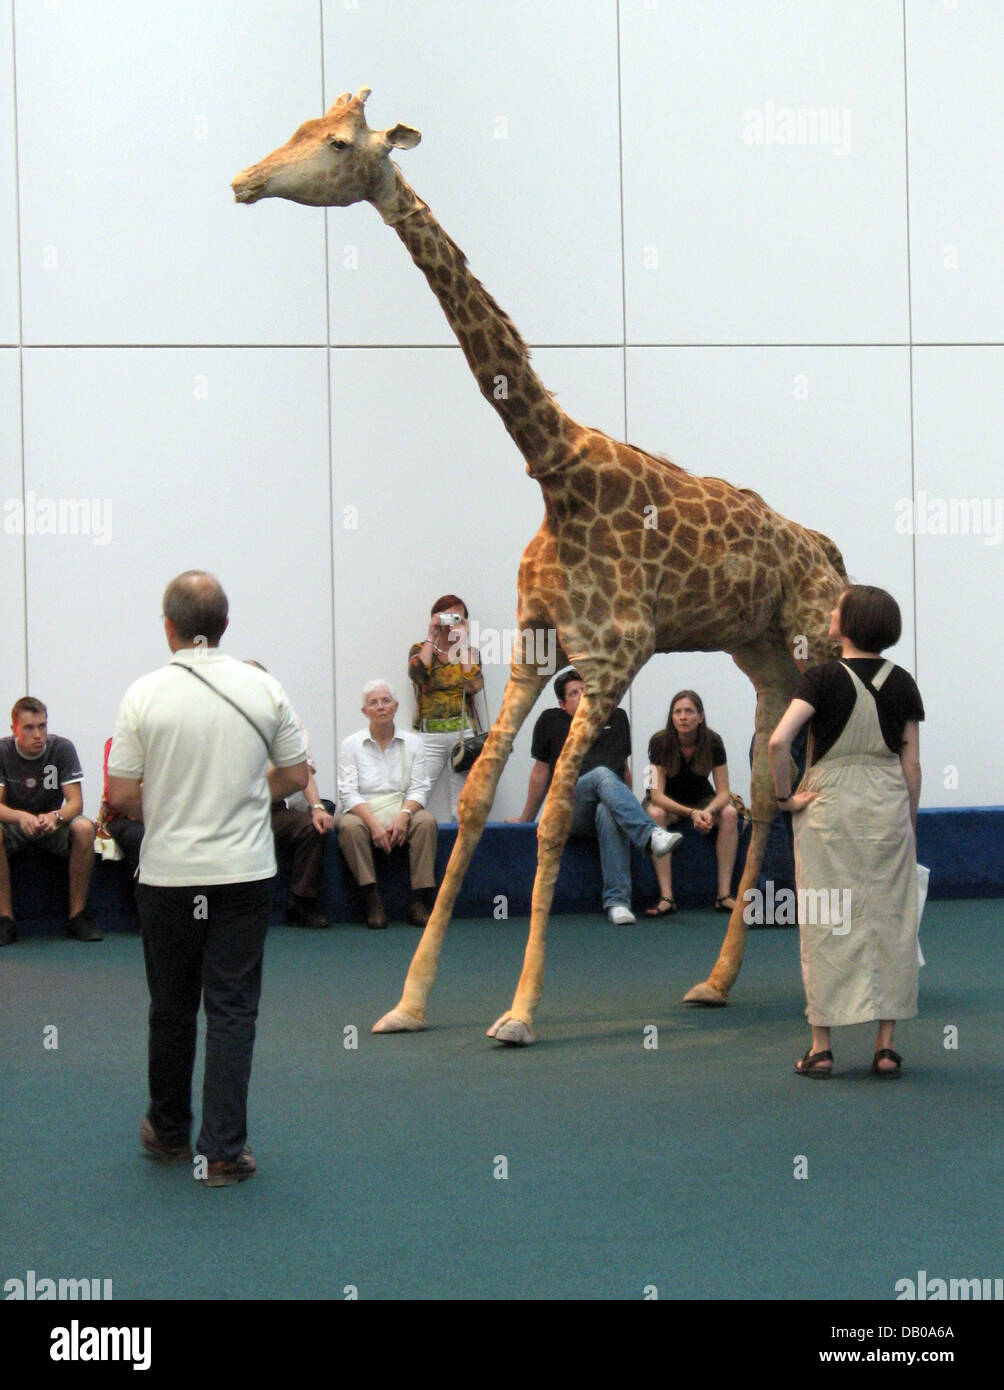 Visitors look at exhibit 'The Zoo Story', a stuffed giraffe, by Peter Friedl at the documenta 12 art exhibition in Kassel, Germany, 24 July 2007. Giraffe 'Brownie' was killed in an Israeli air strike at the Zoo of Qalqiliyah in the West Bank in 2006. Documenta art exhibtion is regarded as the world's largest and most important regular exhibition of contemporaray art. Photo: Frank R Stock Photo